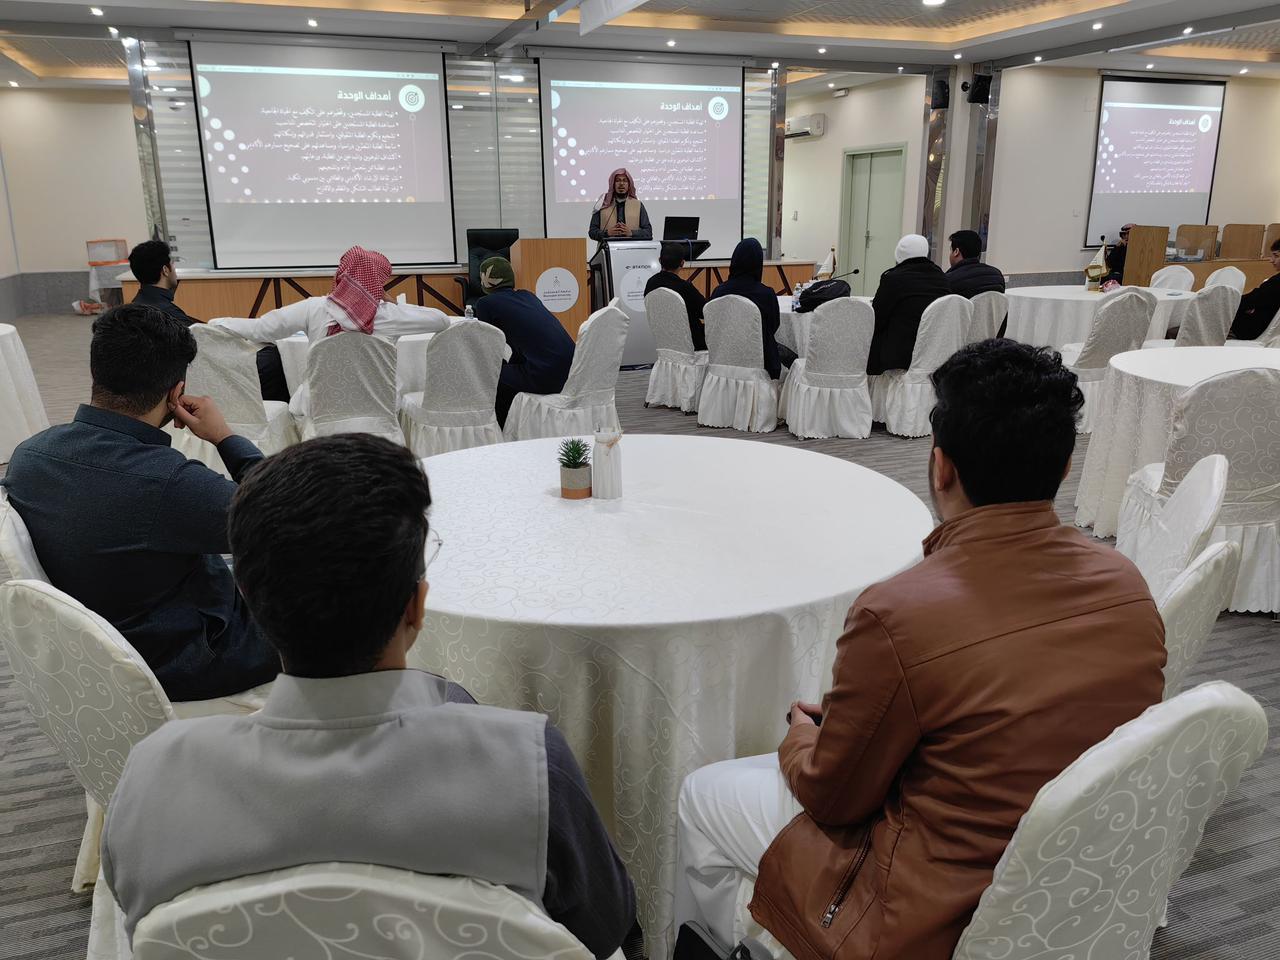 Mustaqbal University organized an orientation meeting for new students in the second semester of the academic year 1445 AH